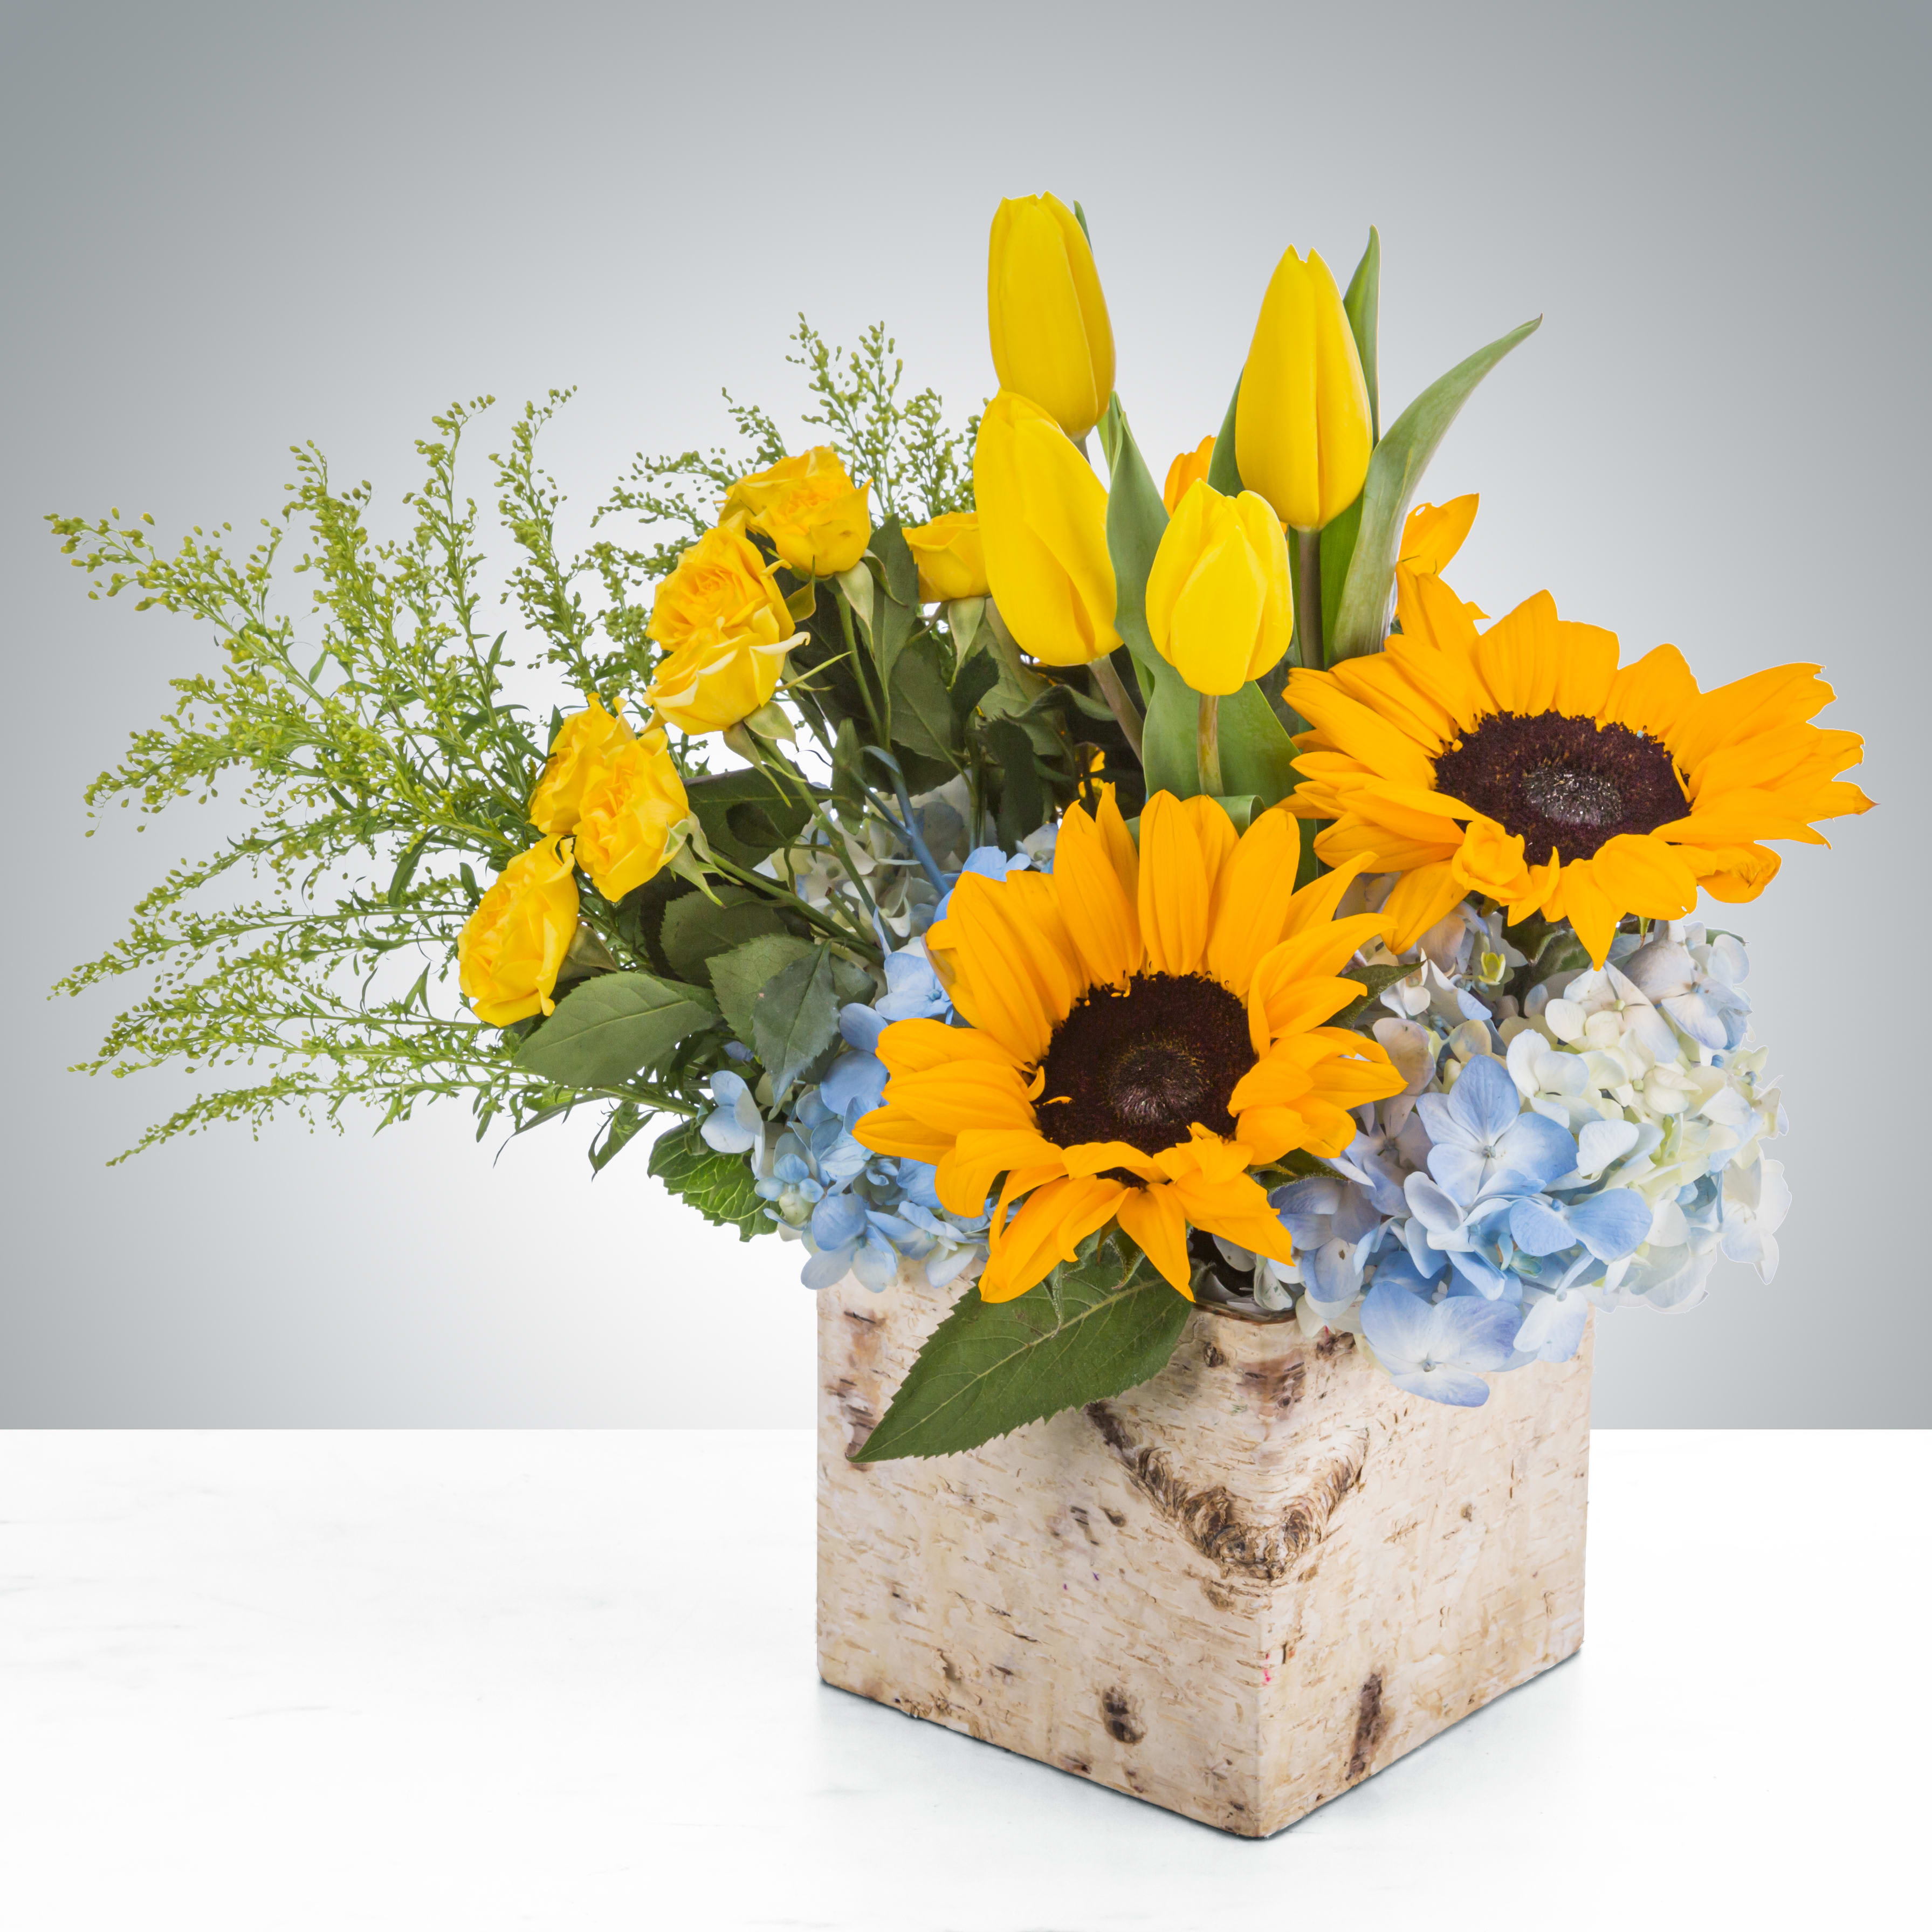 Cutie Pie  - Send this to the cutie in your life! Great for a new baby, a birthday, or just cheering somebody up! This summertime arrangement with sunflowers, tulips, and yellow roses lights up any space.  Approximate Dimensions: 15&quot;D x 13&quot;H